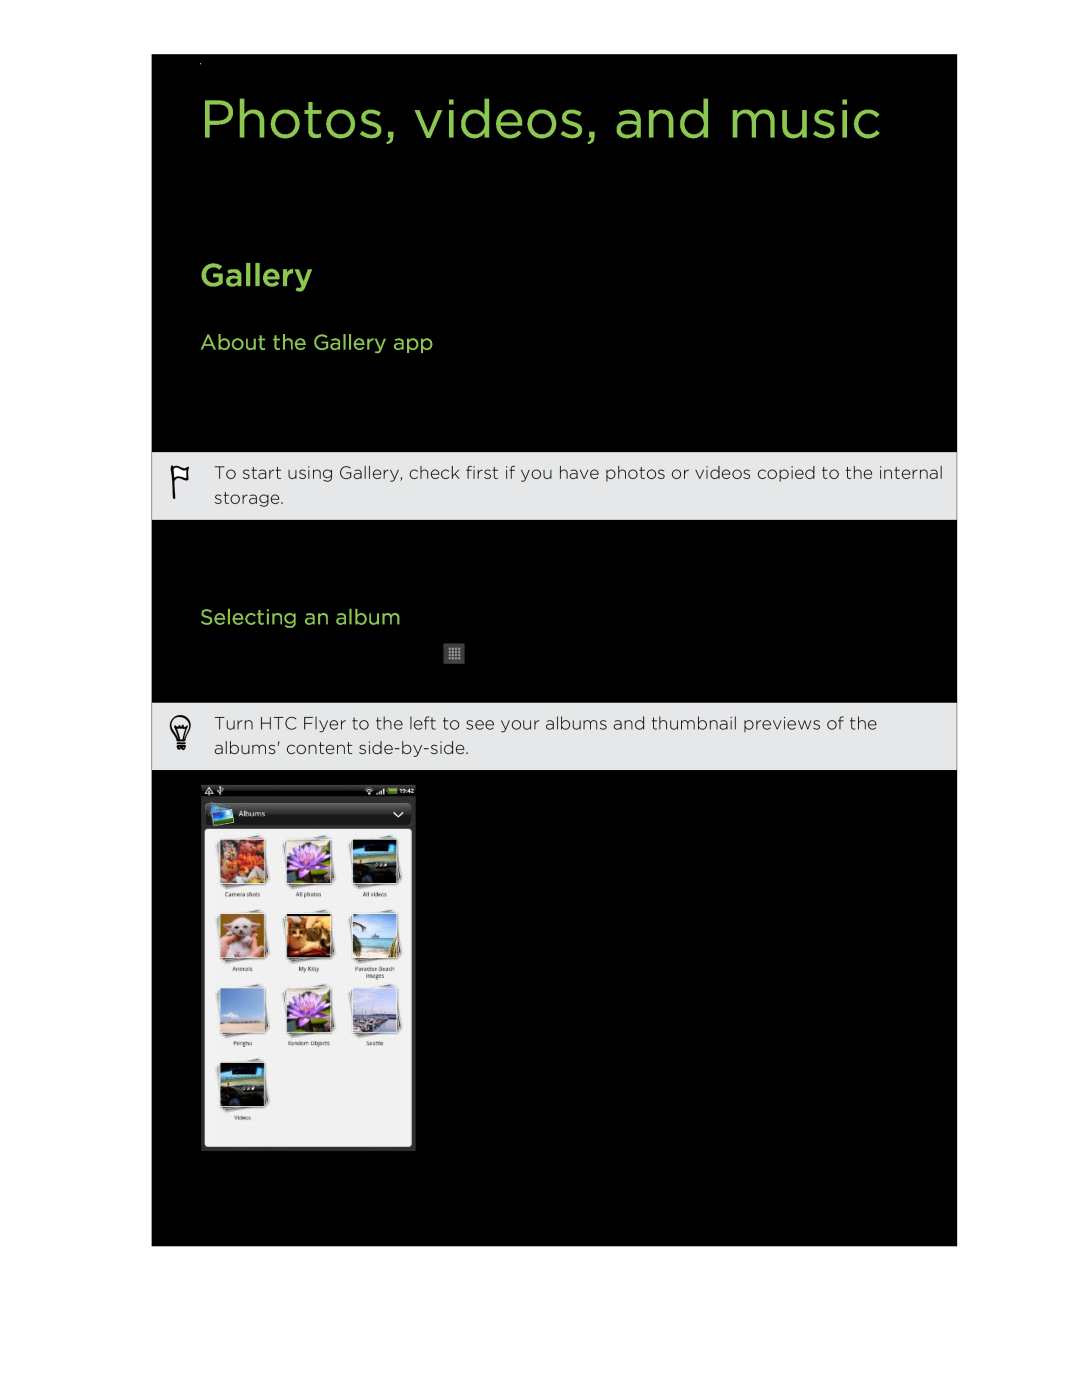 HTC HTCFlyerP512 manual Photos, videos, and music, About the Gallery app, Selecting an album 